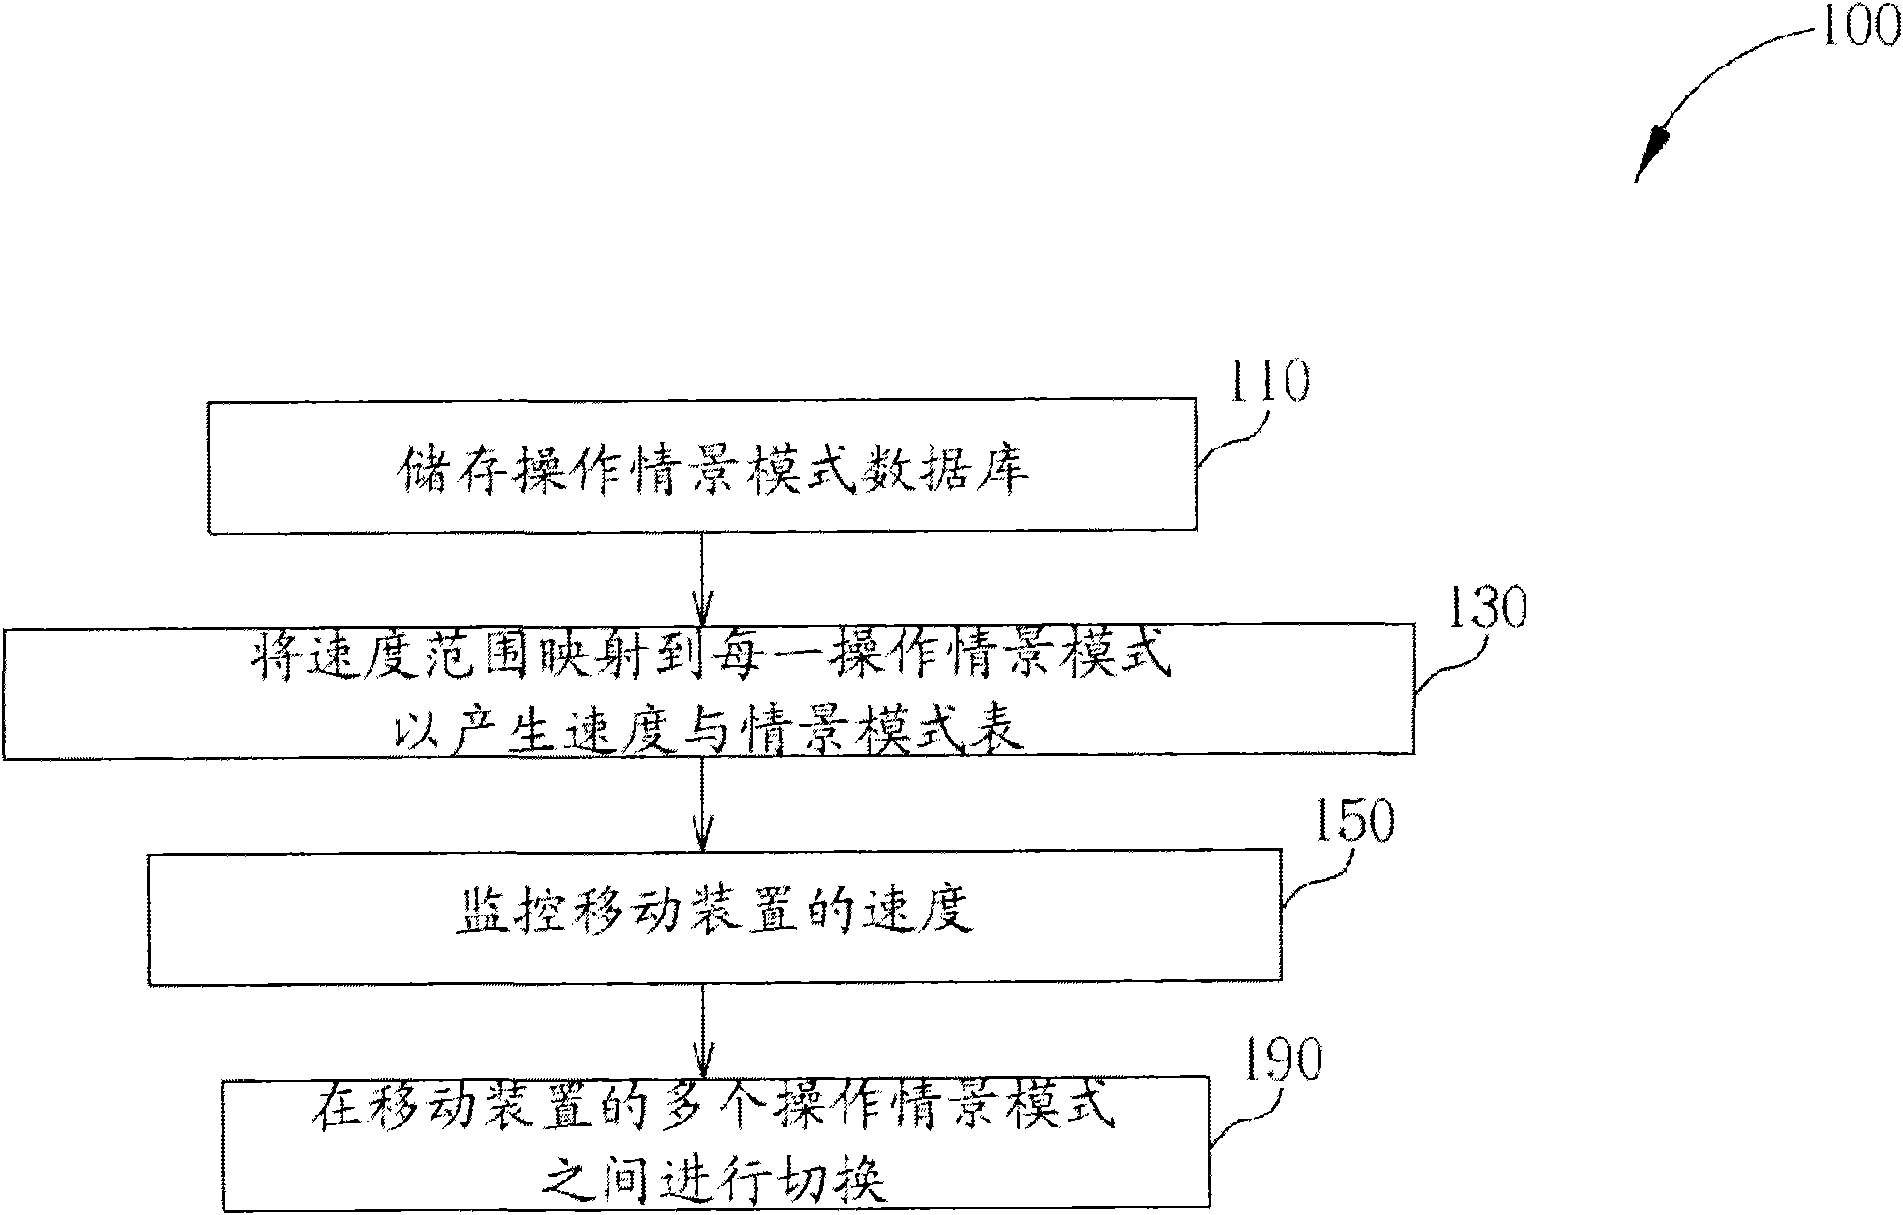 Method for automatically switching operation profiles and relative moving device